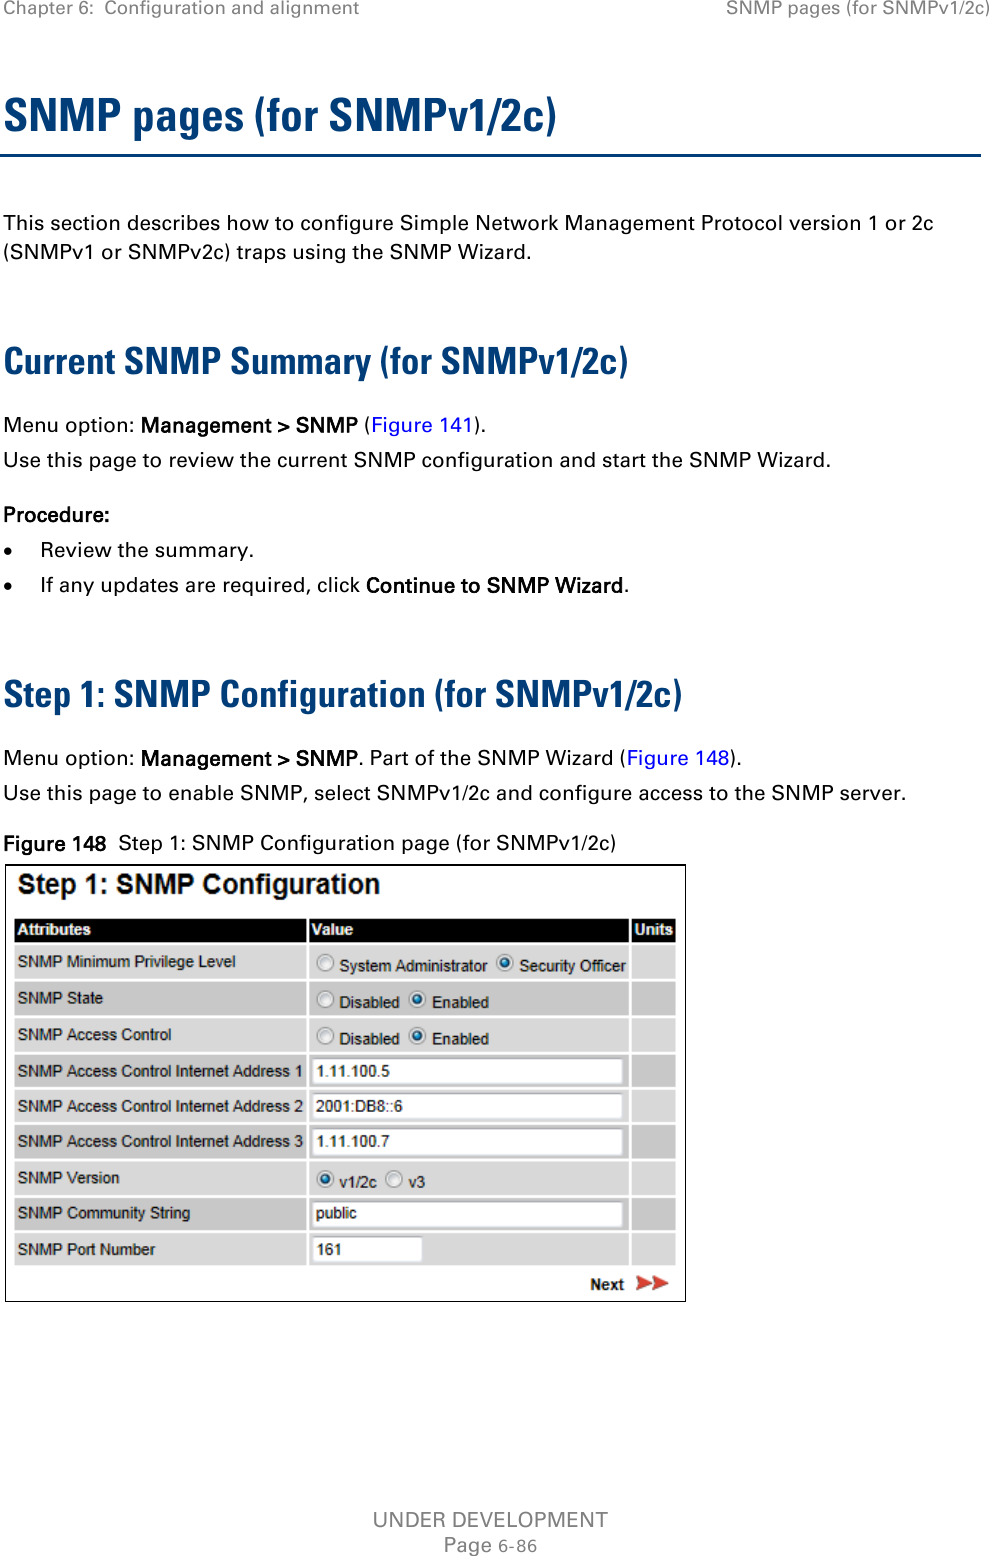 Chapter 6:  Configuration and alignment SNMP pages (for SNMPv1/2c)  SNMP pages (for SNMPv1/2c) This section describes how to configure Simple Network Management Protocol version 1 or 2c (SNMPv1 or SNMPv2c) traps using the SNMP Wizard.  Current SNMP Summary (for SNMPv1/2c) Menu option: Management &gt; SNMP (Figure 141). Use this page to review the current SNMP configuration and start the SNMP Wizard. Procedure: • Review the summary. • If any updates are required, click Continue to SNMP Wizard.  Step 1: SNMP Configuration (for SNMPv1/2c) Menu option: Management &gt; SNMP. Part of the SNMP Wizard (Figure 148). Use this page to enable SNMP, select SNMPv1/2c and configure access to the SNMP server. Figure 148  Step 1: SNMP Configuration page (for SNMPv1/2c)    UNDER DEVELOPMENT Page 6-86 